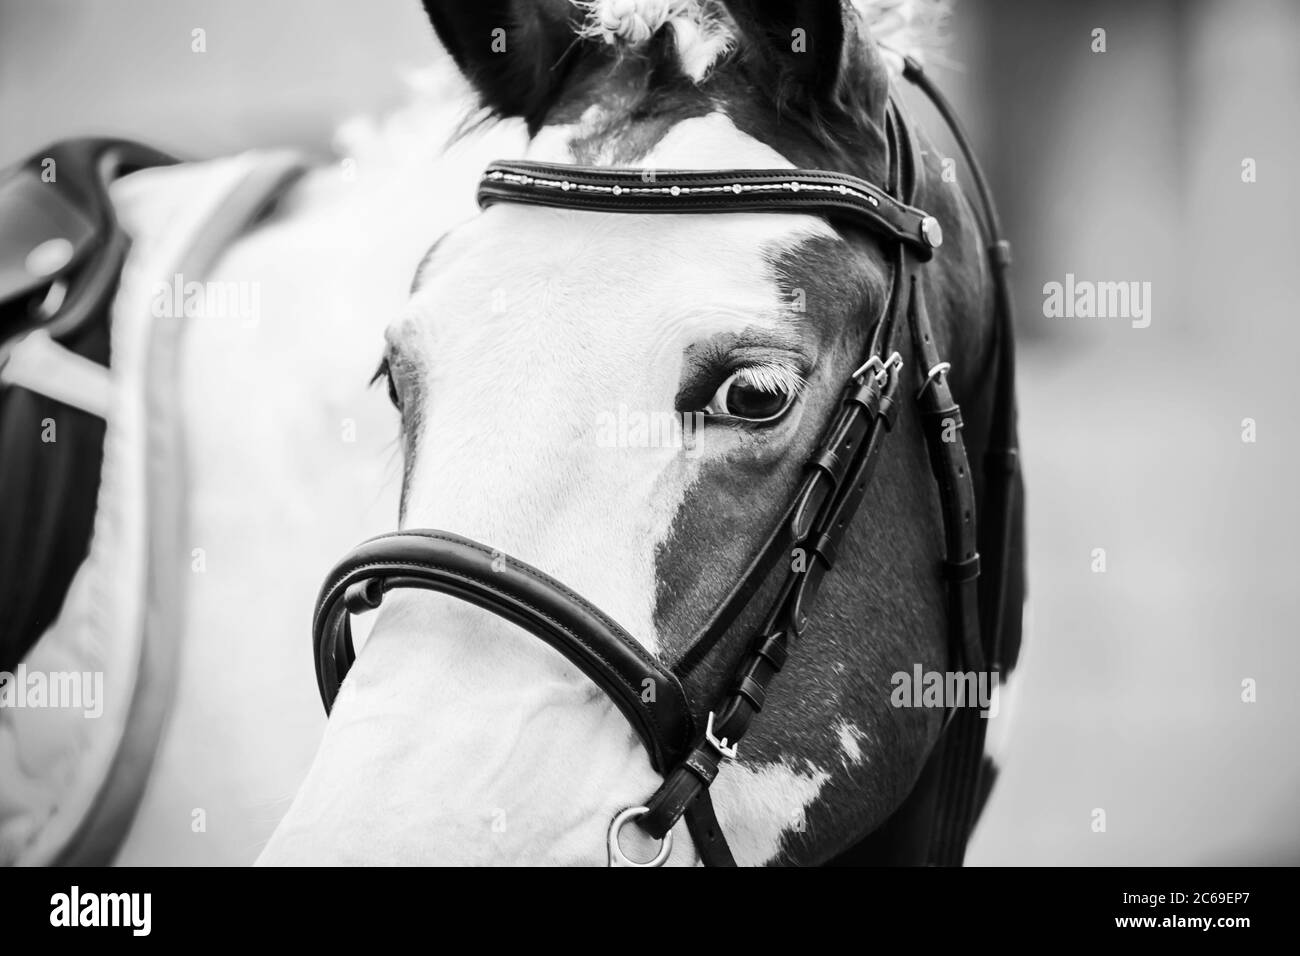 Black-and-white portrait of a spotted sports horse with white lashes with a leather bridle on its muzzle. Stock Photo